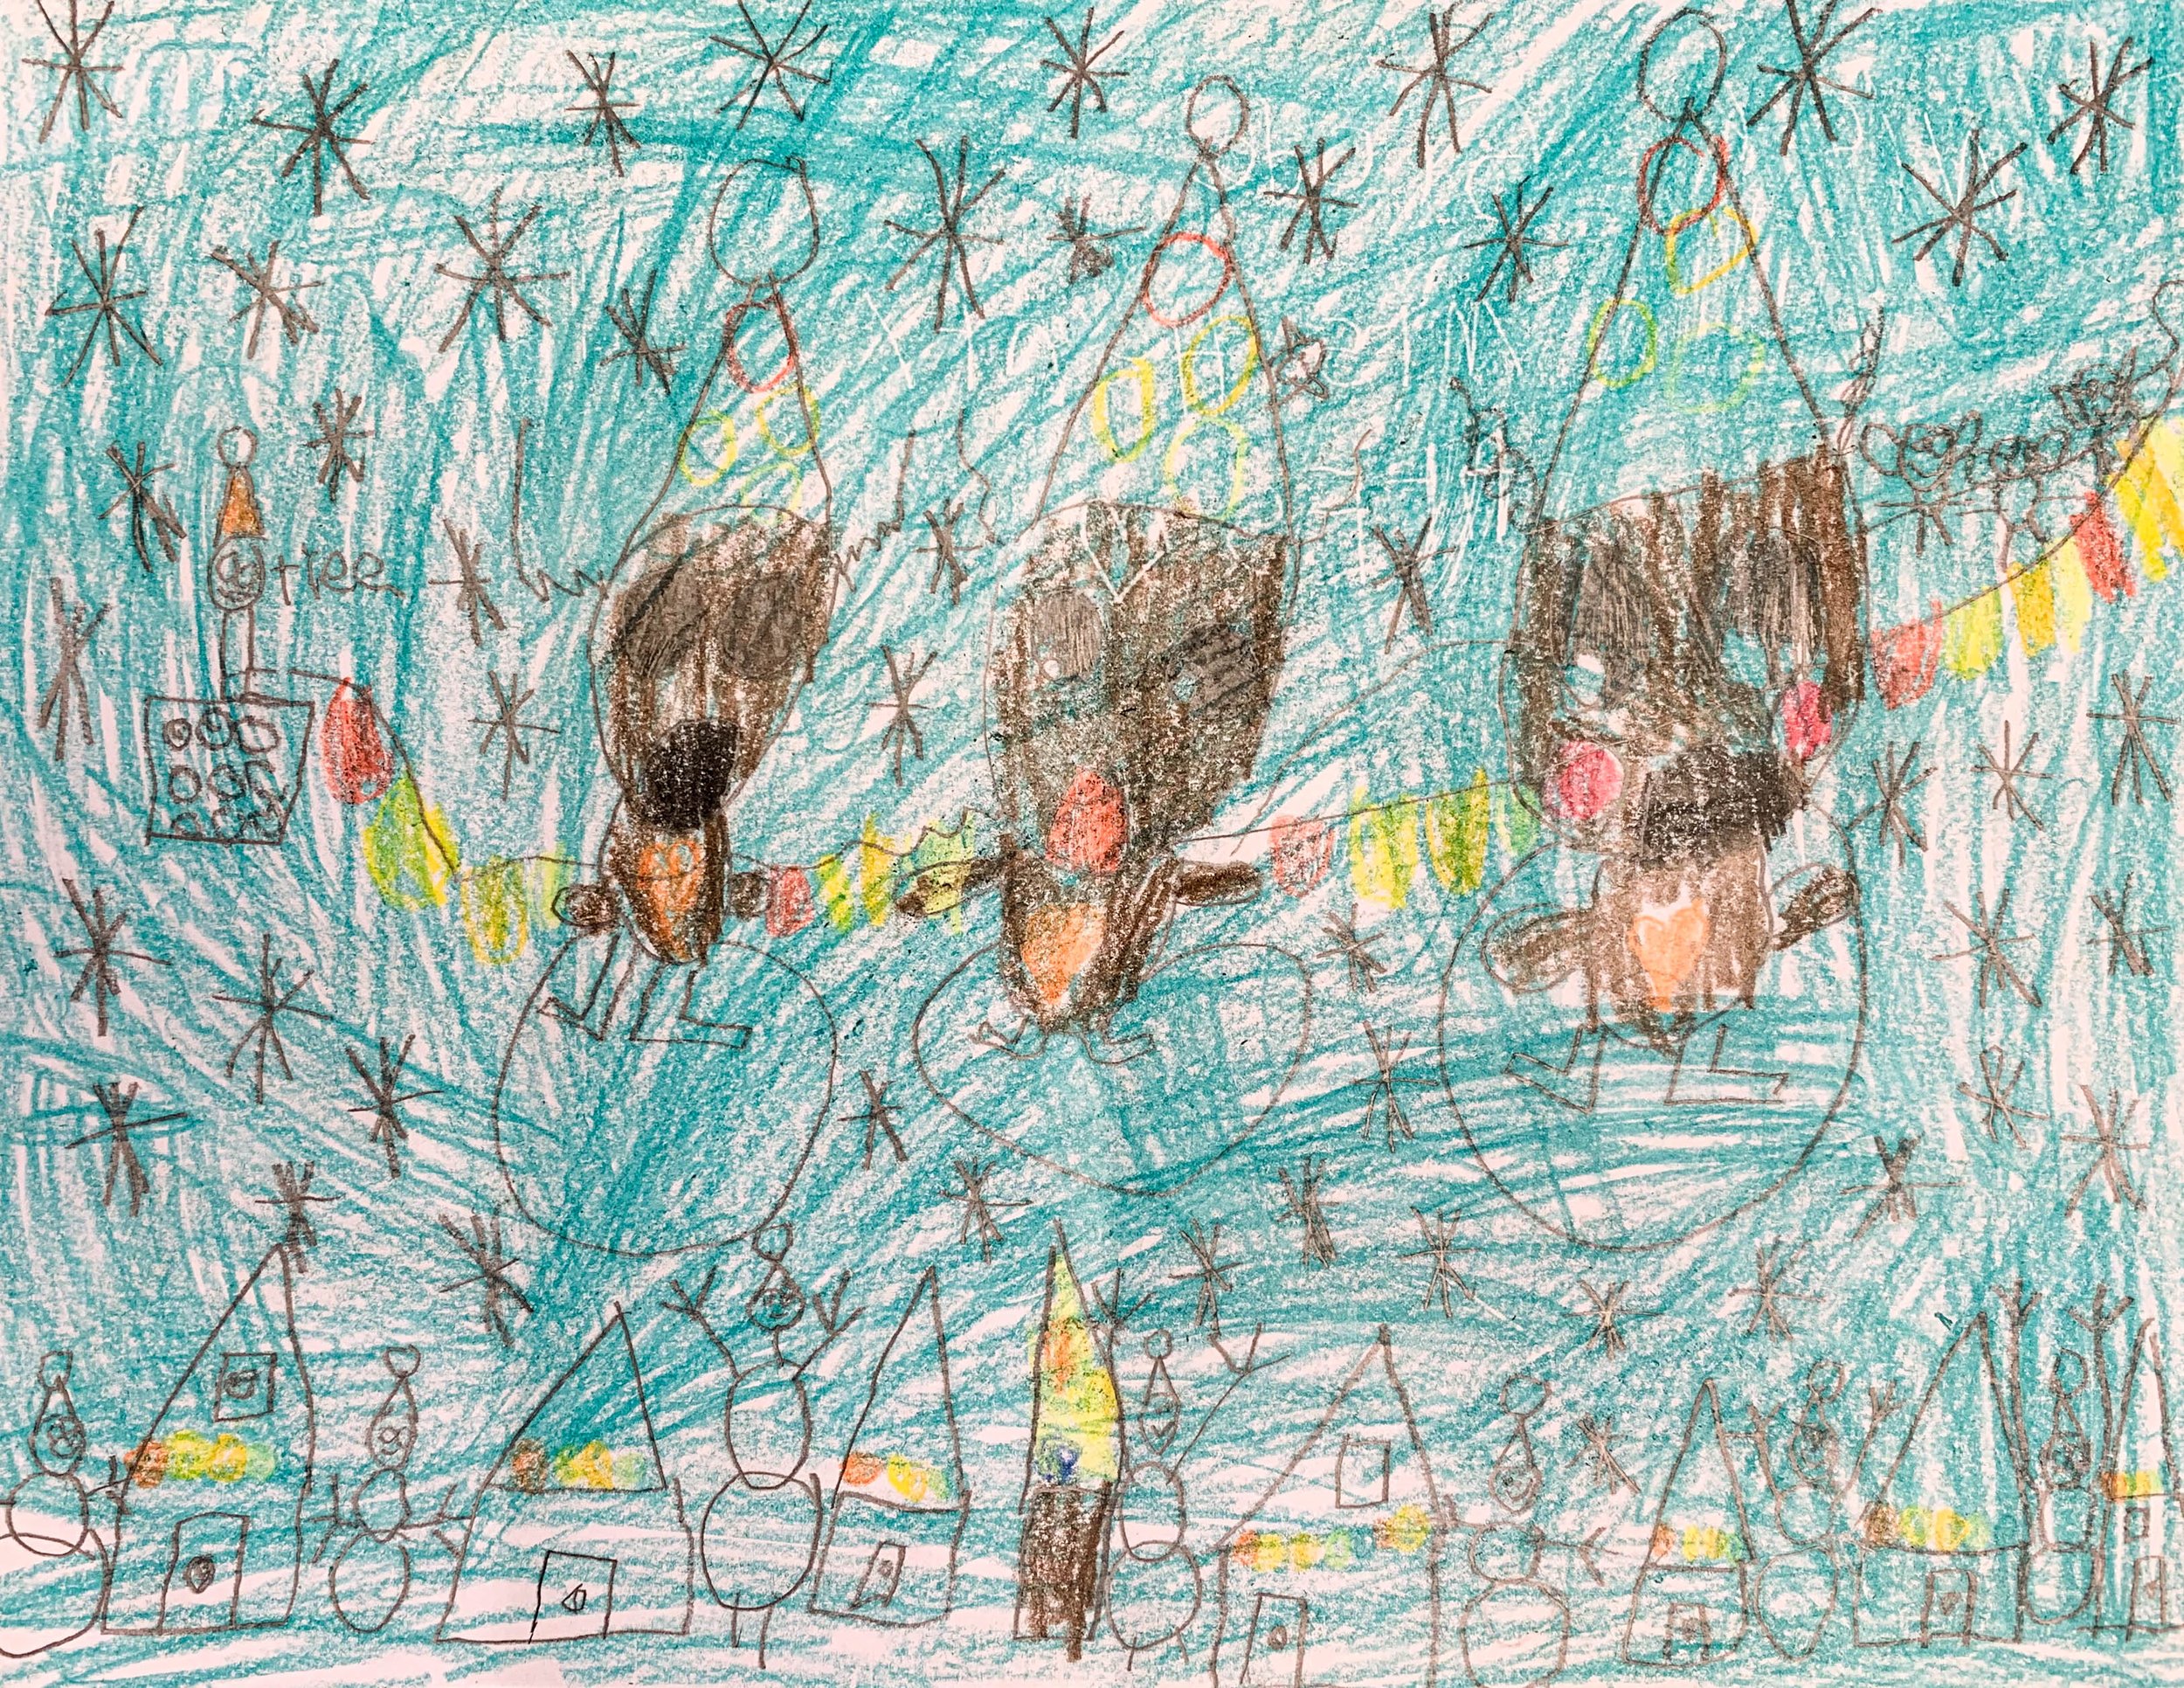 Artwork by Grade 2 Student from Royal Road Elementary School